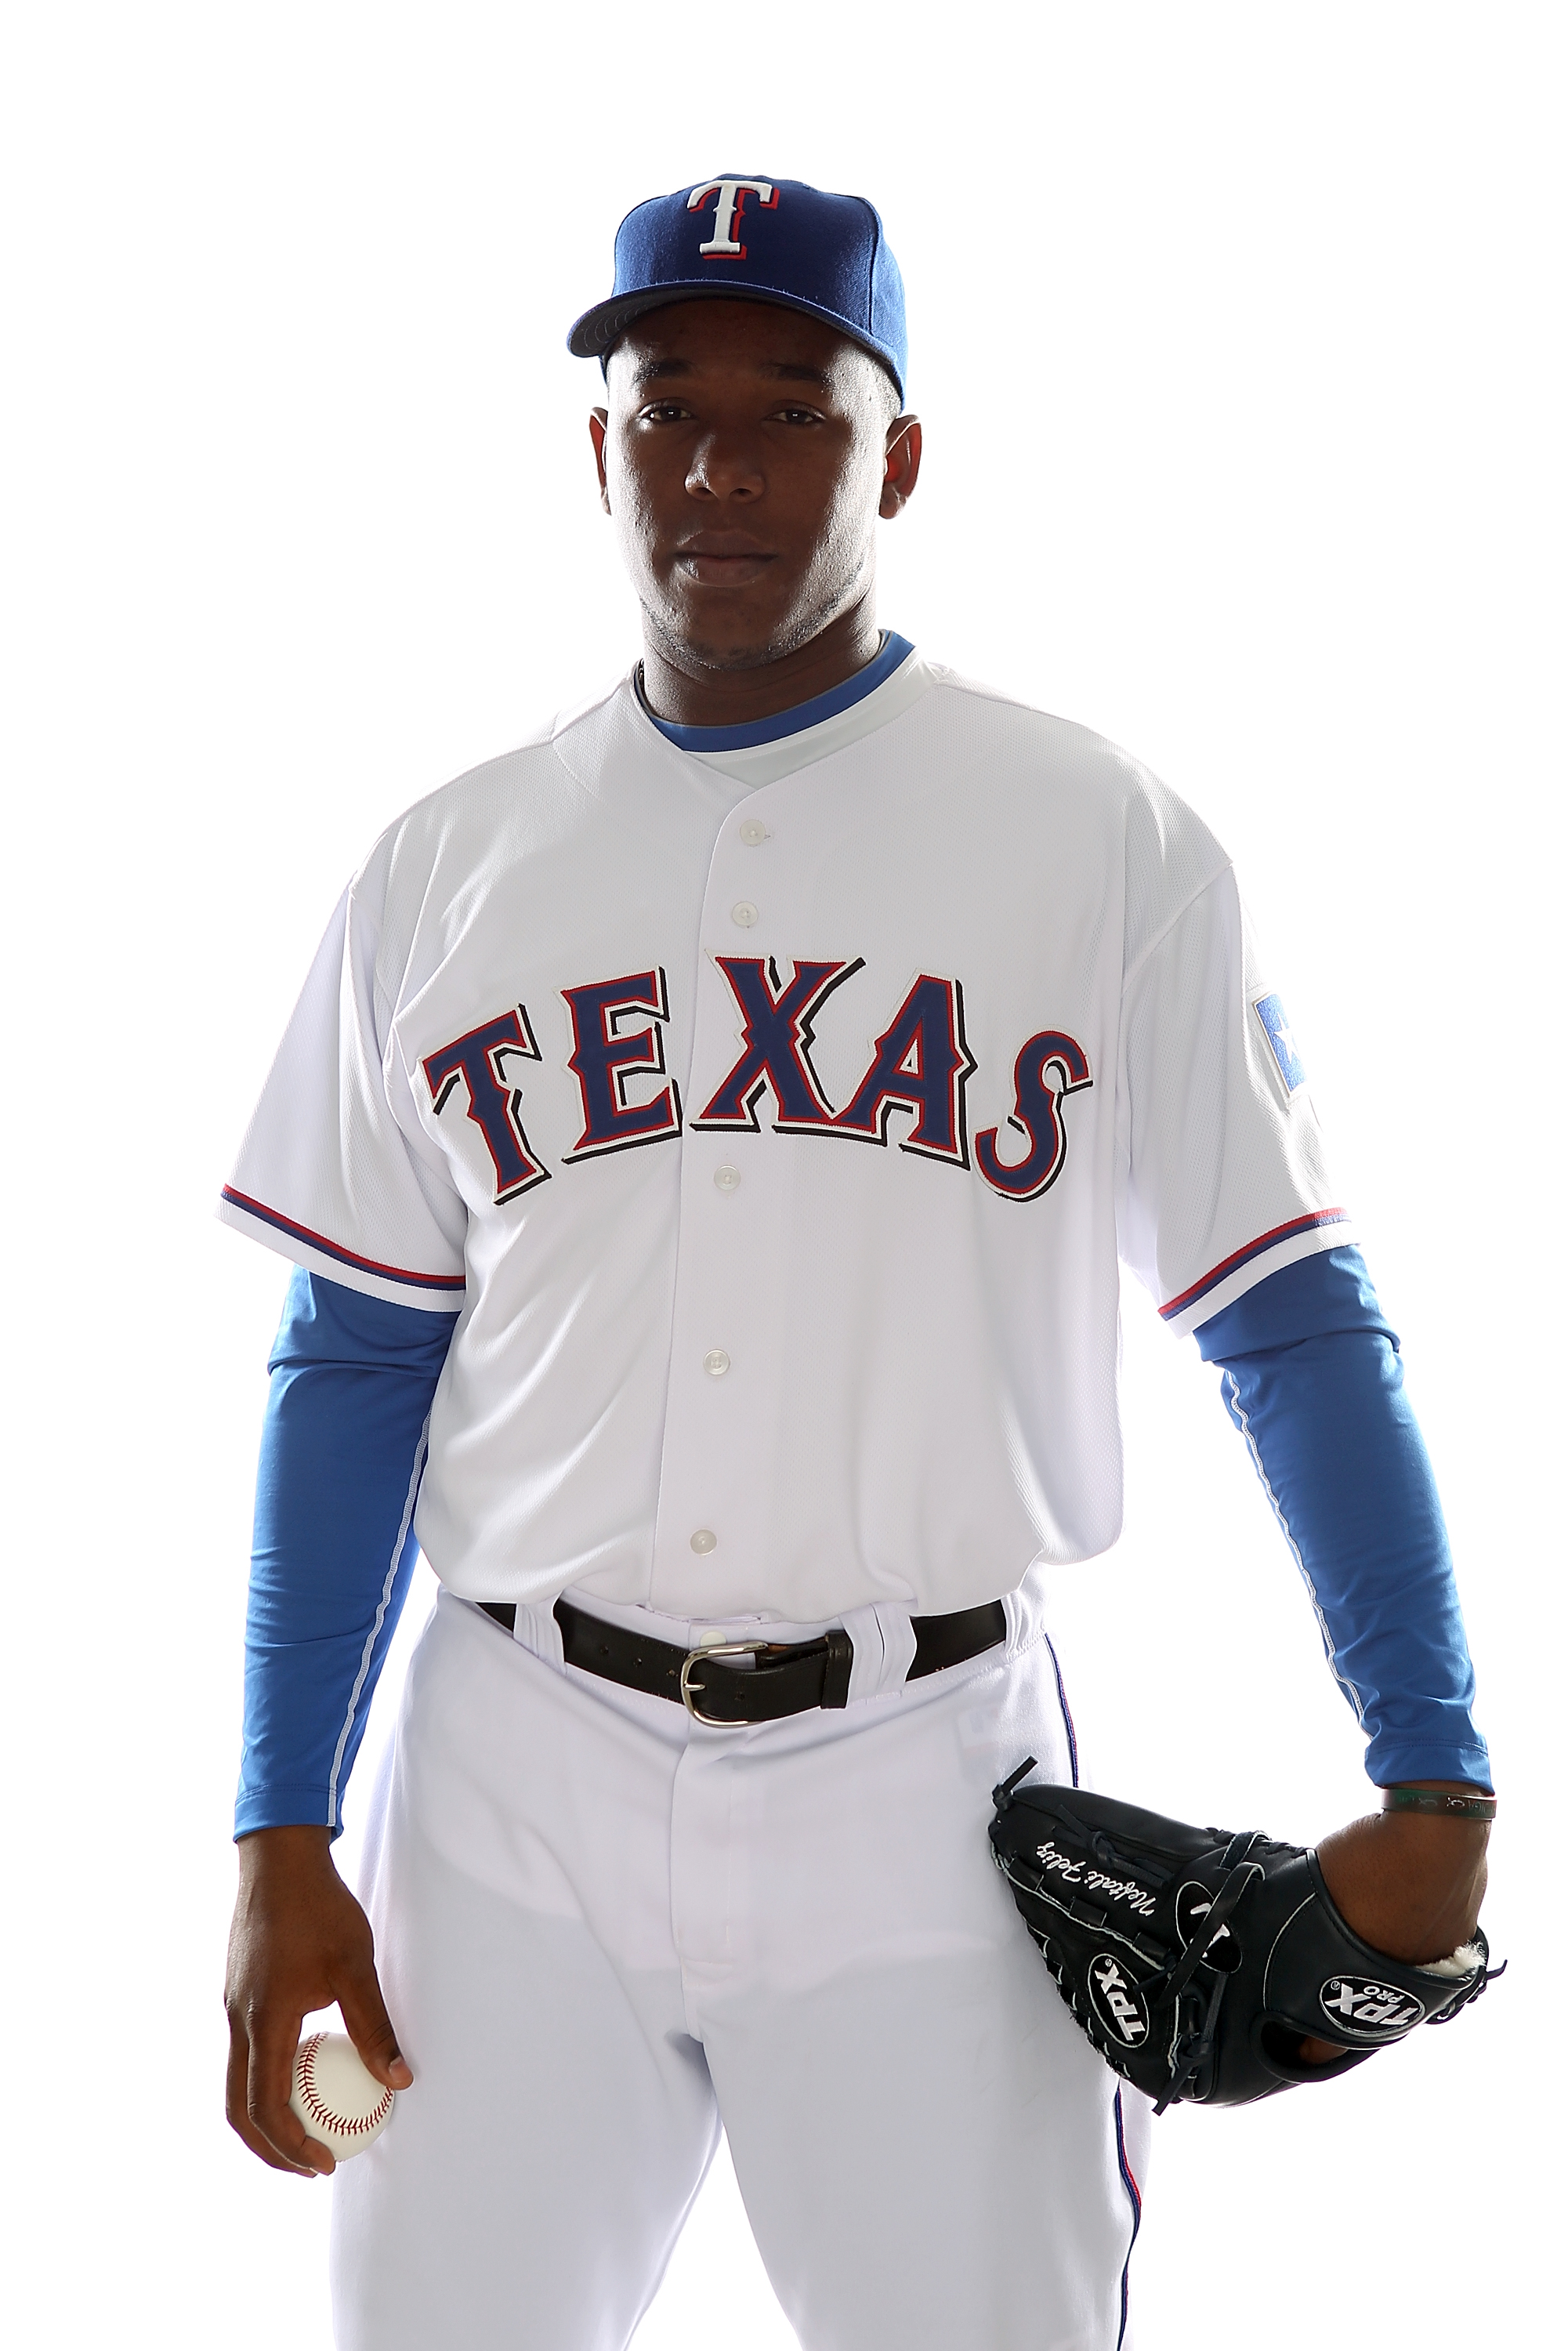 Baby Beltre fits nicely into the Texas Rangers' long term plans